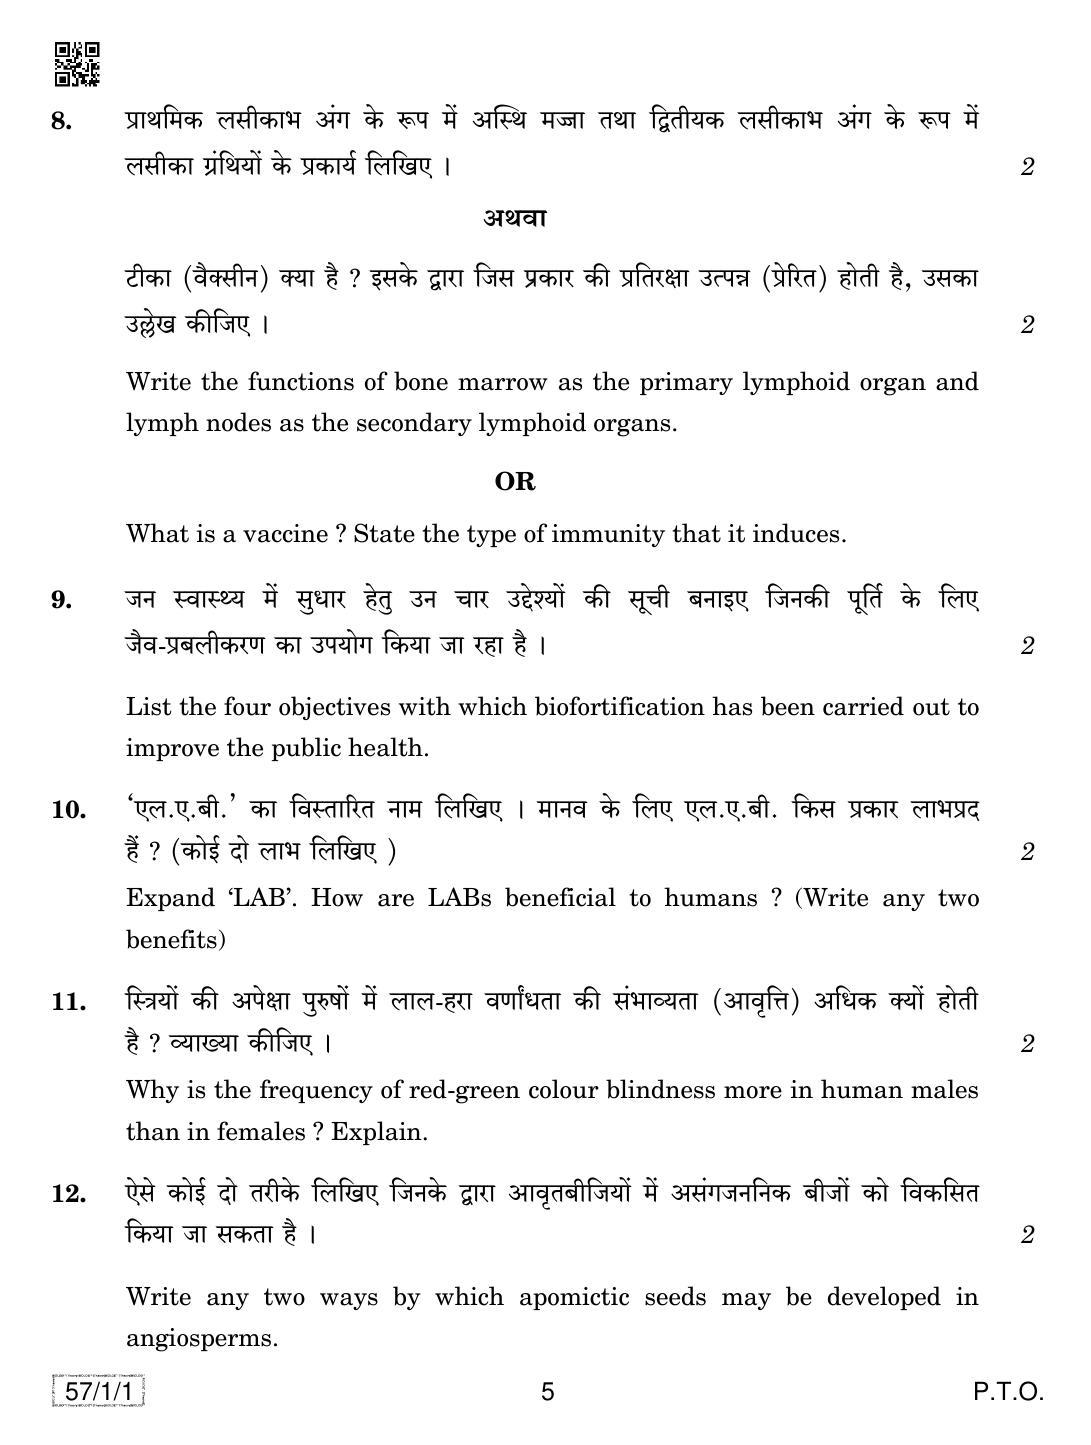 CBSE Class 12 57-1-1 BIOLOGY 2019 Compartment Question Paper - Page 5